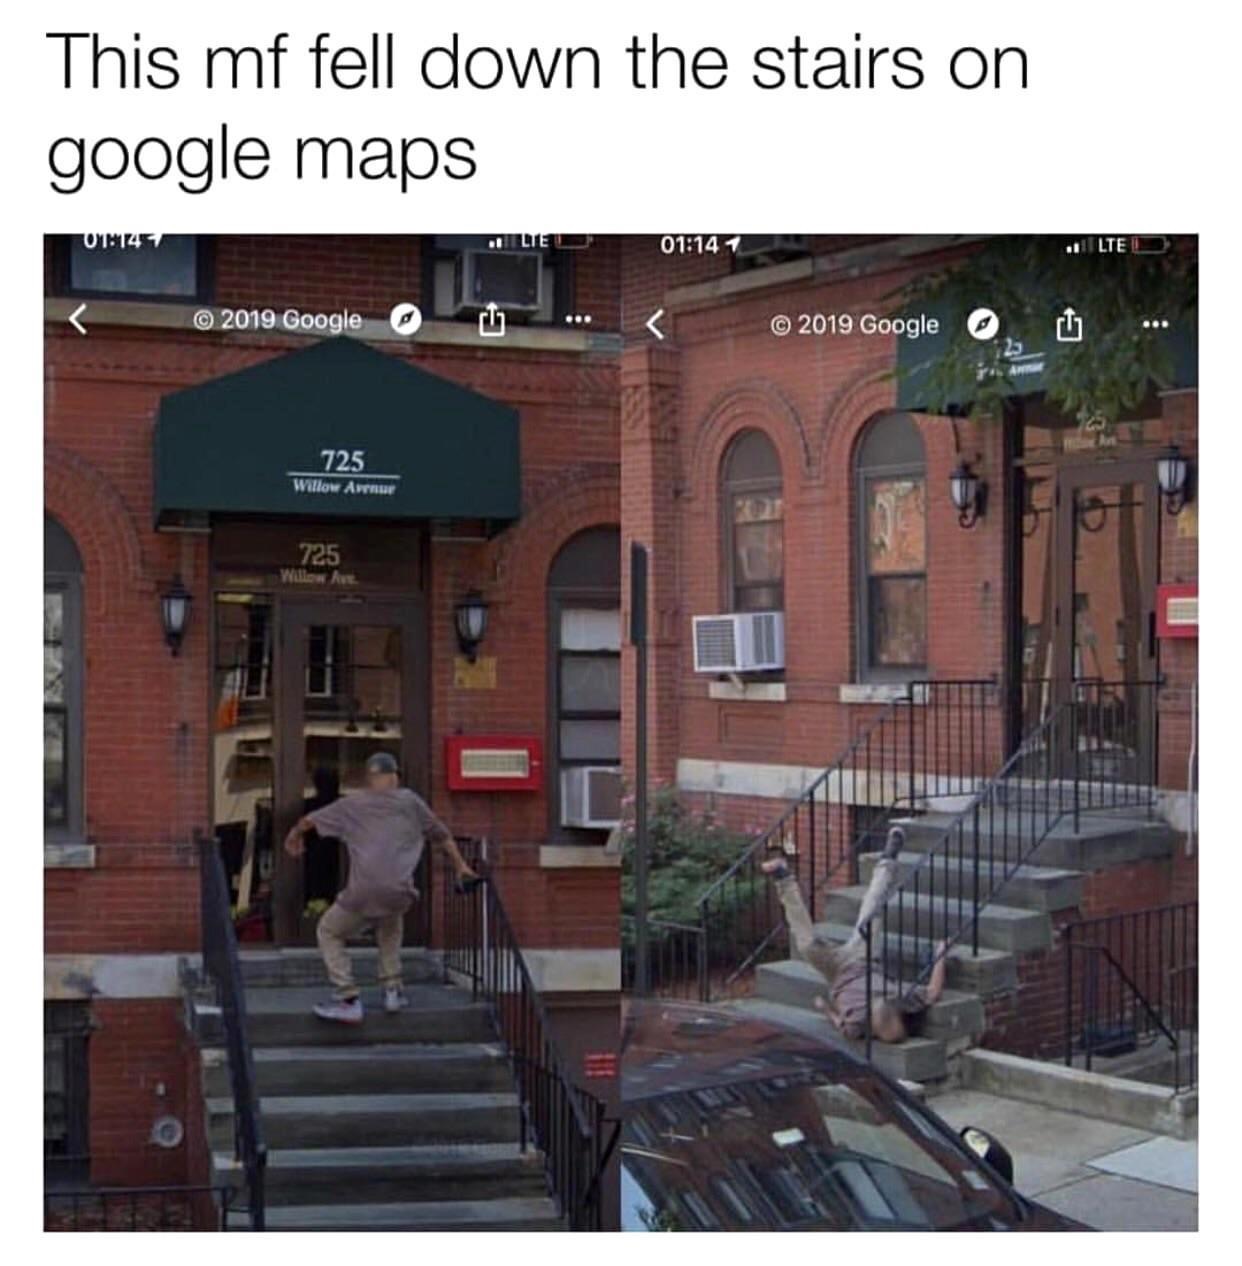 mf fell down the stairs on google maps - This mf fell down the stairs on google maps OTH1457 1 | Lte 2019 Google Cgt 2019 Google 725 Willow Air 725 Willow us